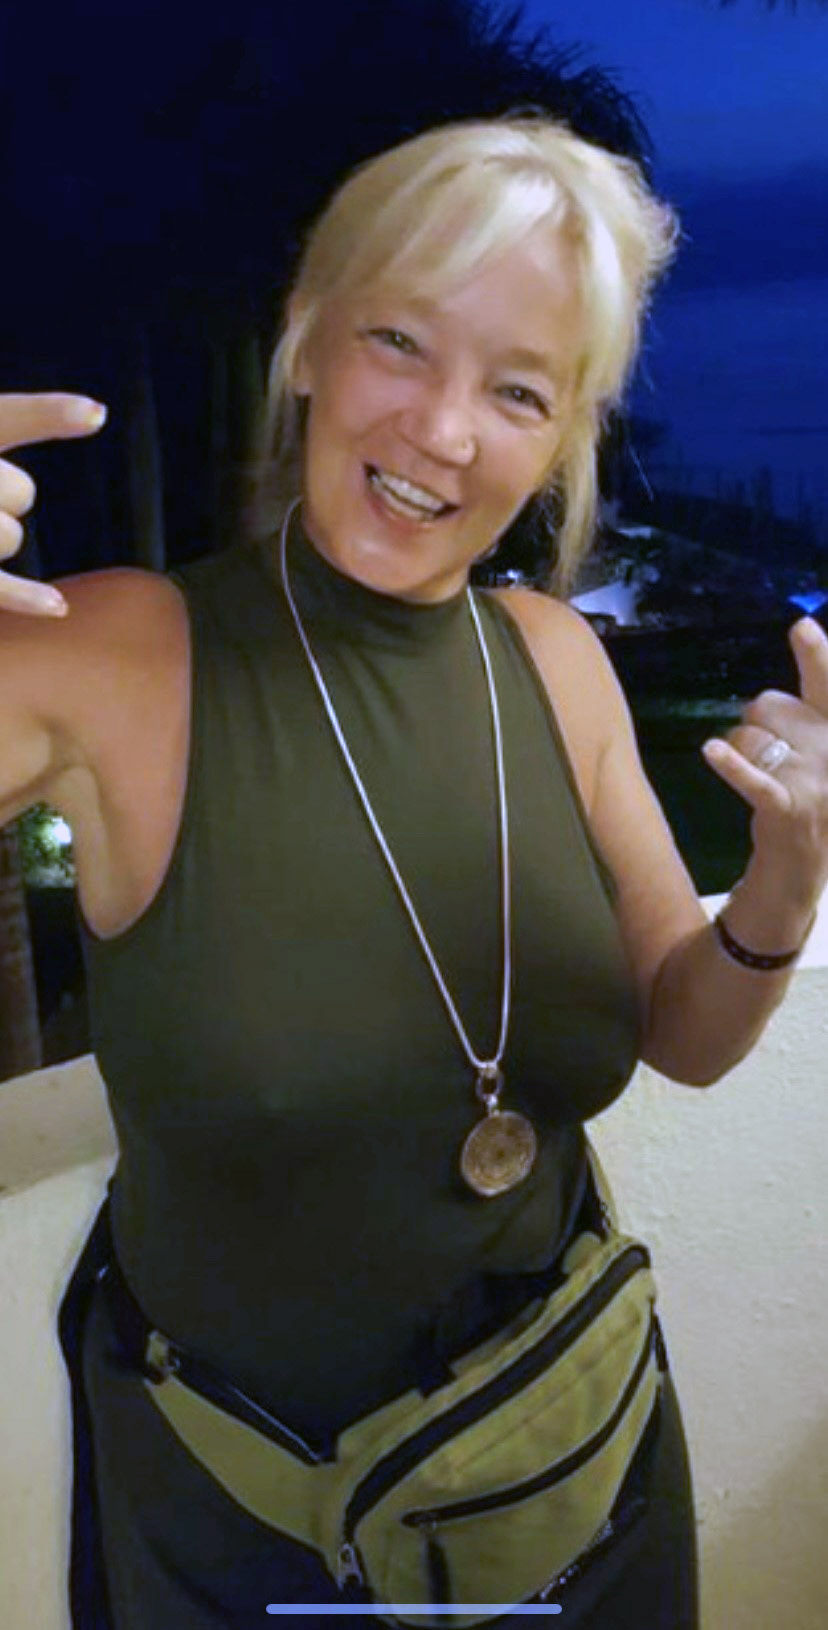 A woman with blonde hair wearing a black sleeveless shirt, black pants and a green fanny pack.